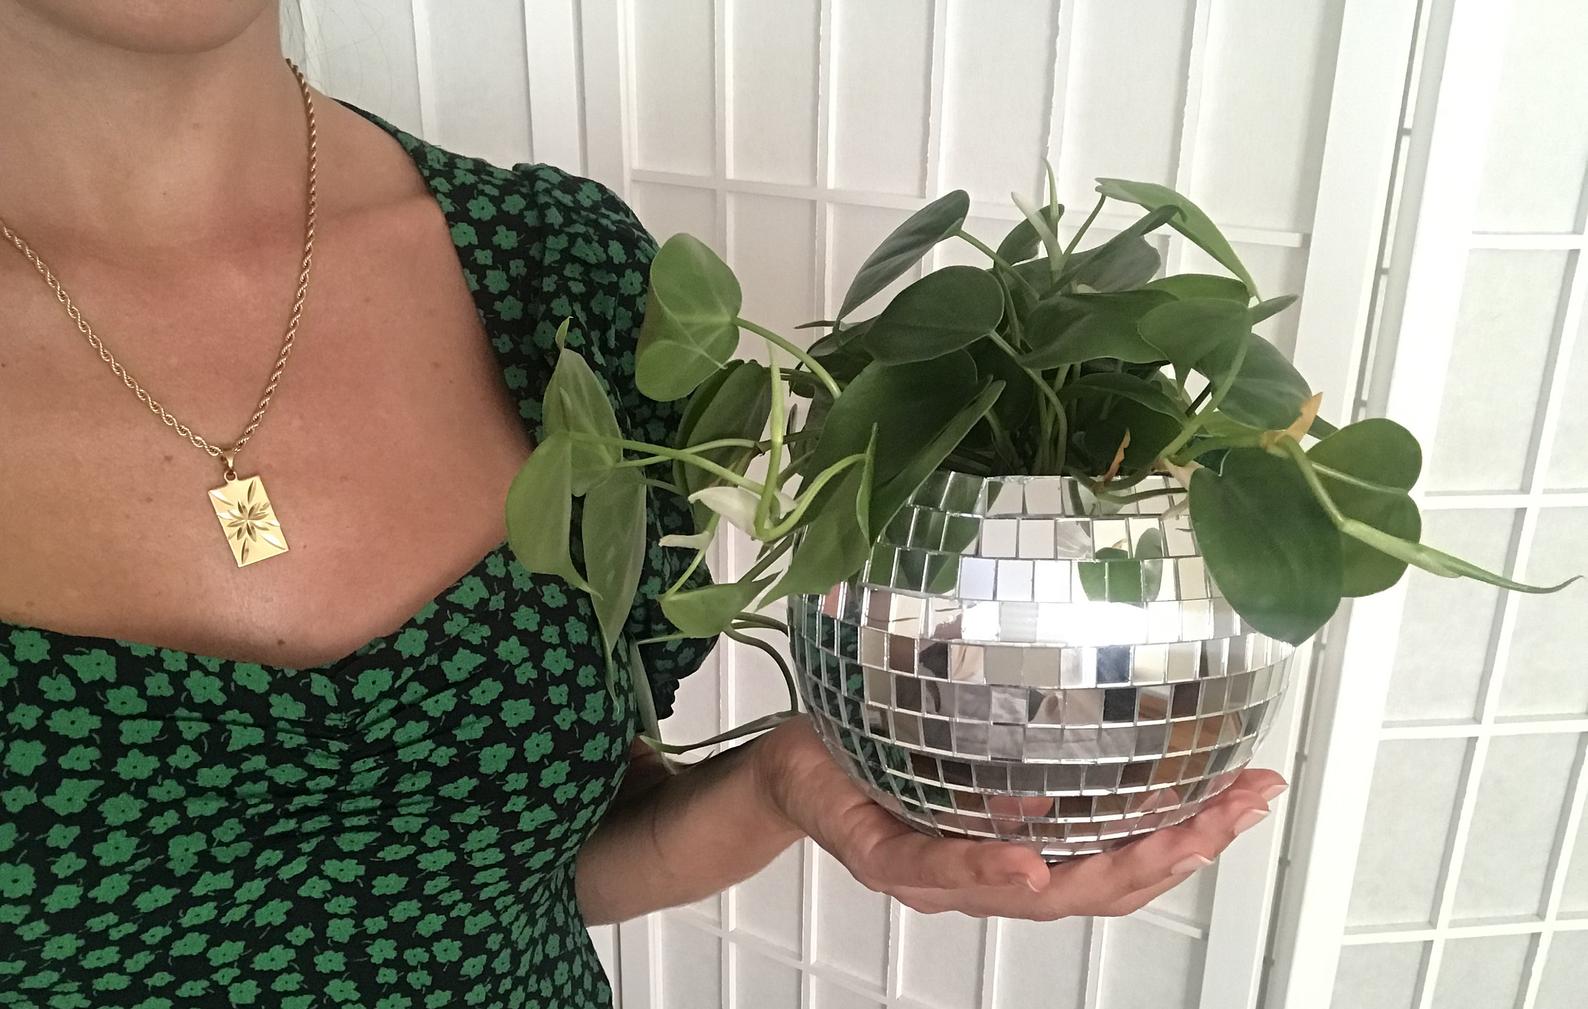 You Can Get A Shiny Disco Ball Planter That Will Give Your Home That 70s Vibe